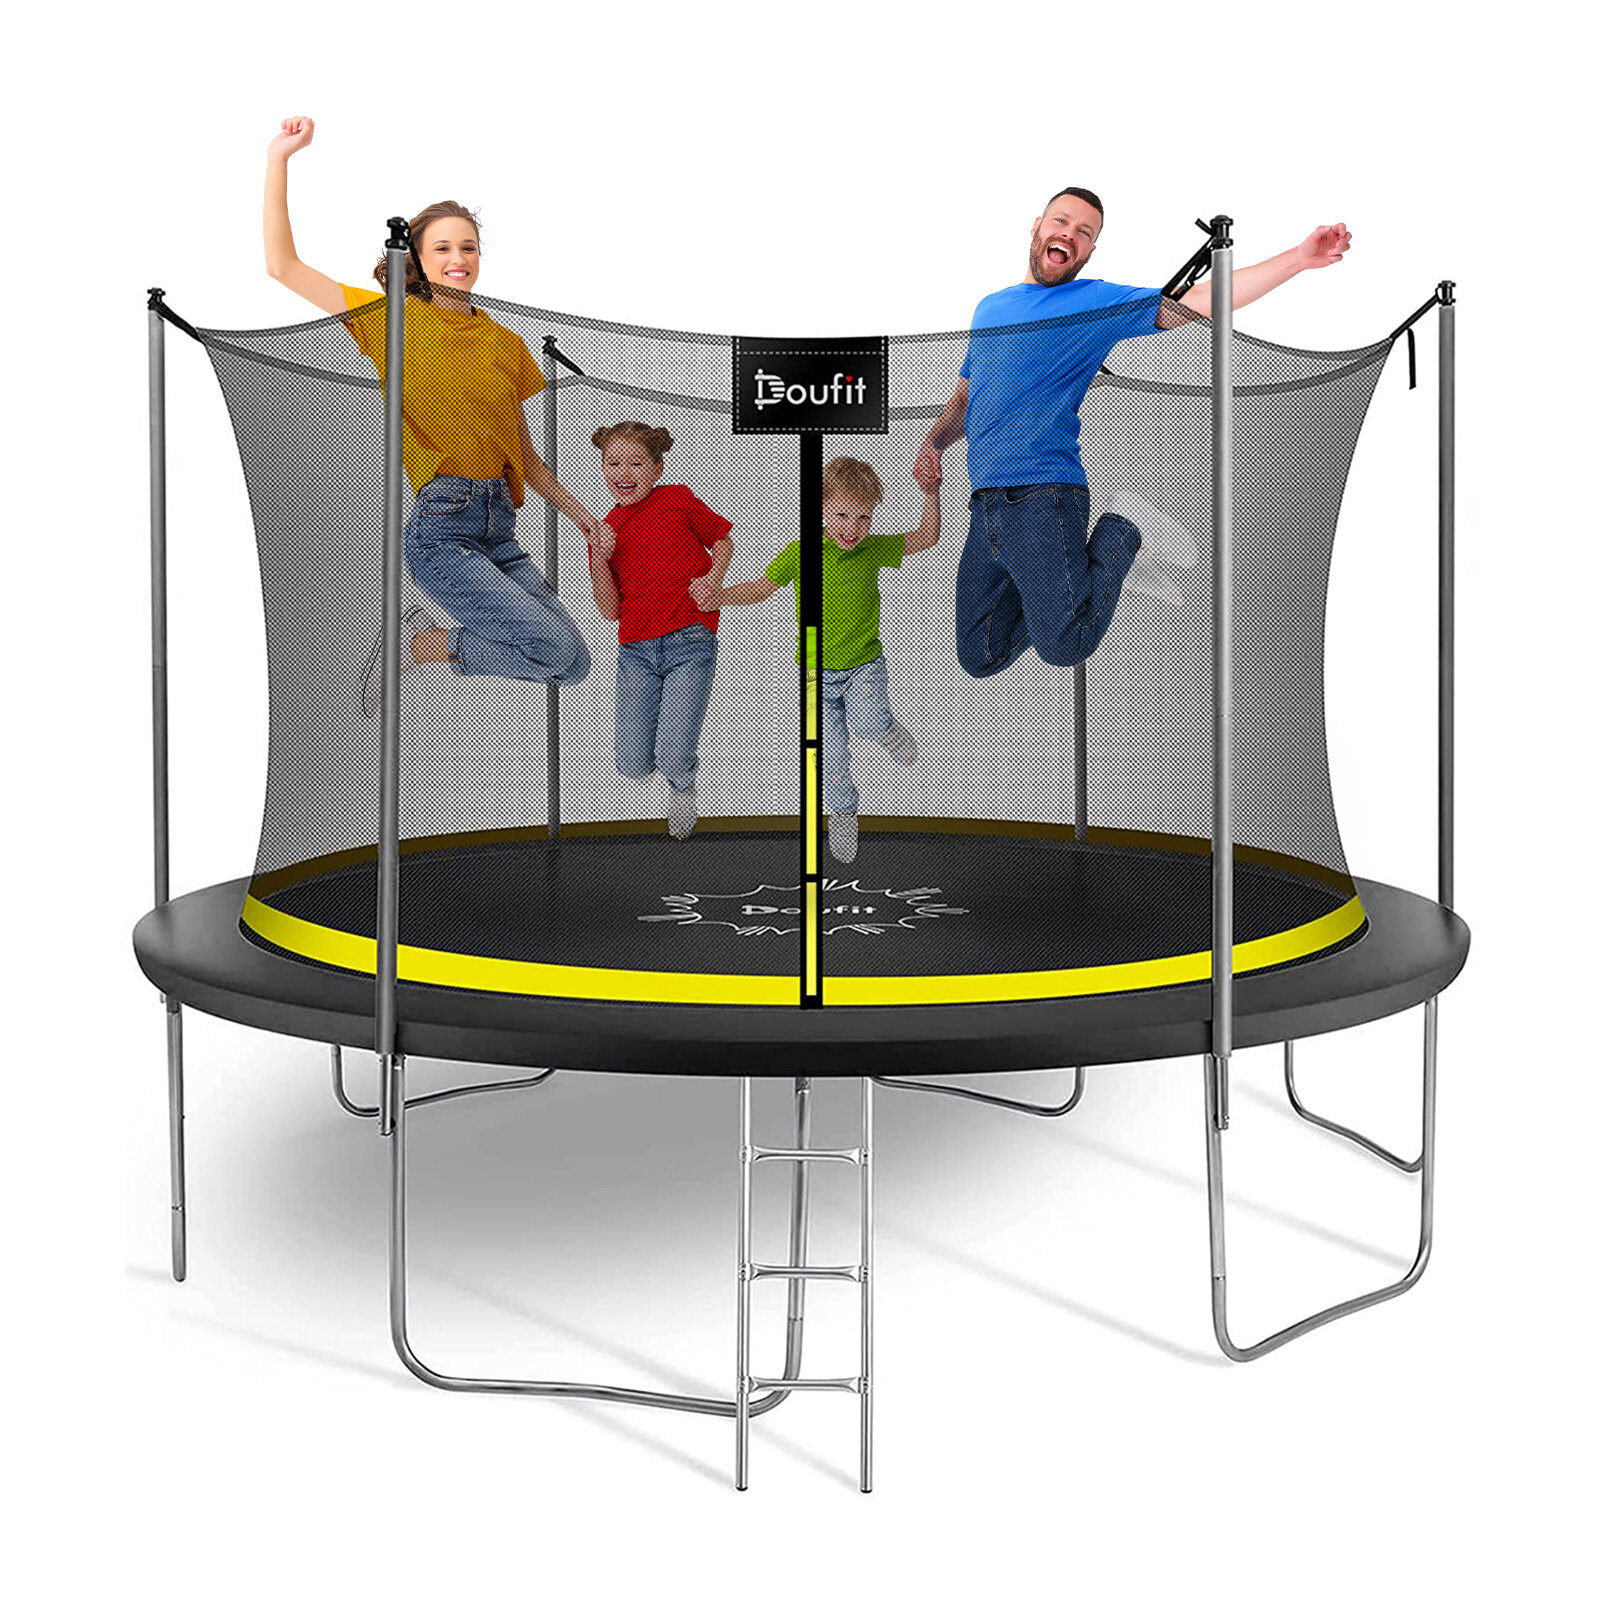 

Doufit 12FT Trampoline Jumping Exercise Fitness Heavy Duty Re-bounder Bed with Enclosure Net Ladder Outdoor Home Sport